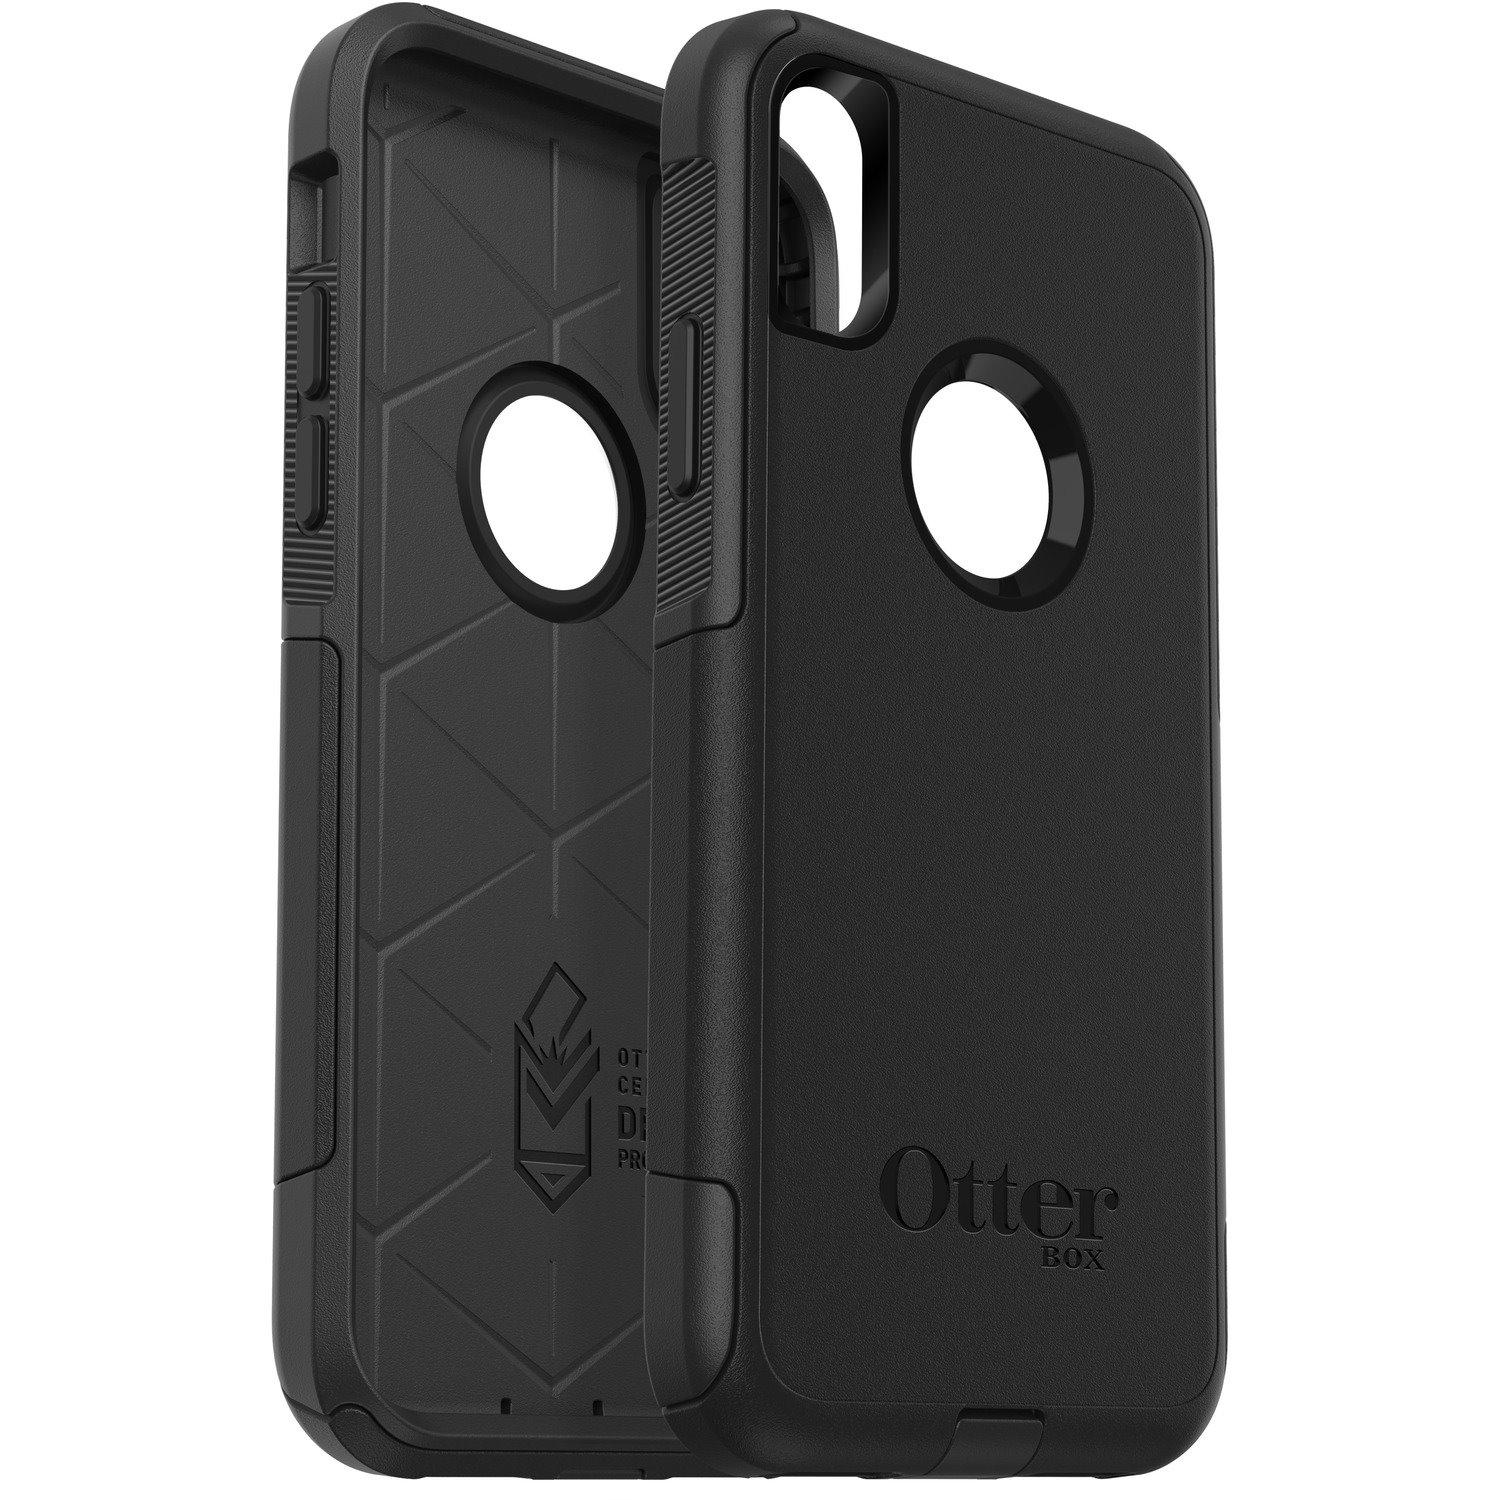 OtterBox Commuter Case for Apple iPhone X, iPhone XS Smartphone - Black